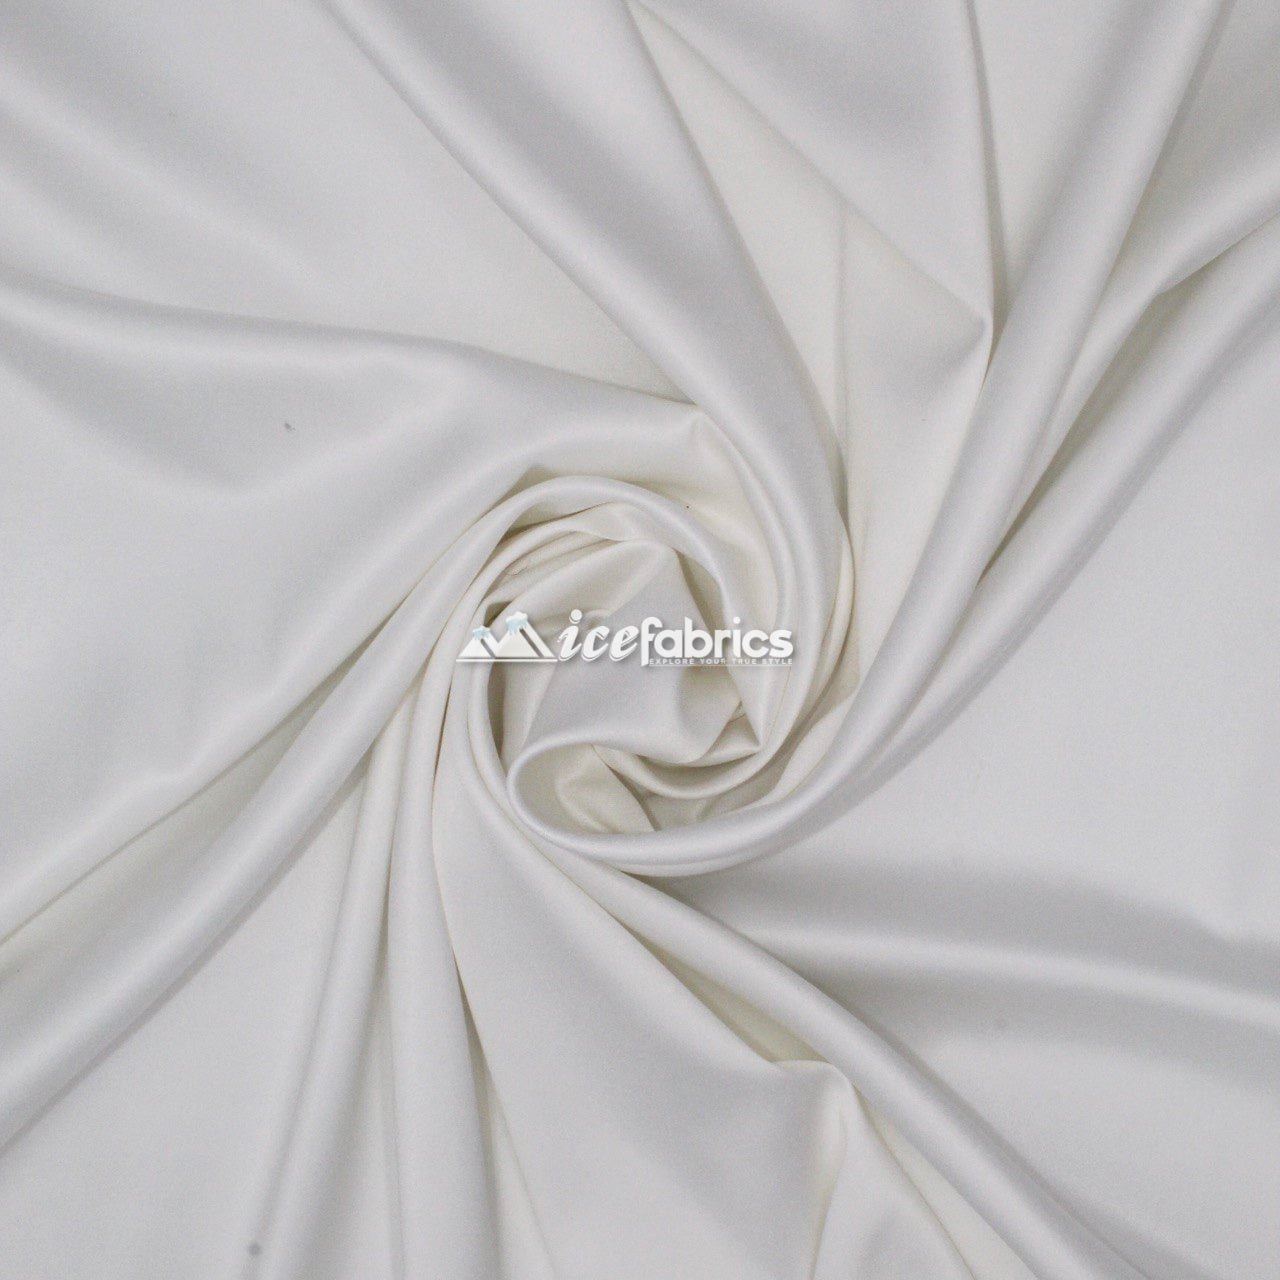 Armani Thick Solid Color Silky Stretch Satin Fabric Sold By The YardSatin FabricICE FABRICSICE FABRICSIvoryArmani Thick Solid Color Silky Stretch Satin Fabric Sold By The Yard ICE FABRICS White